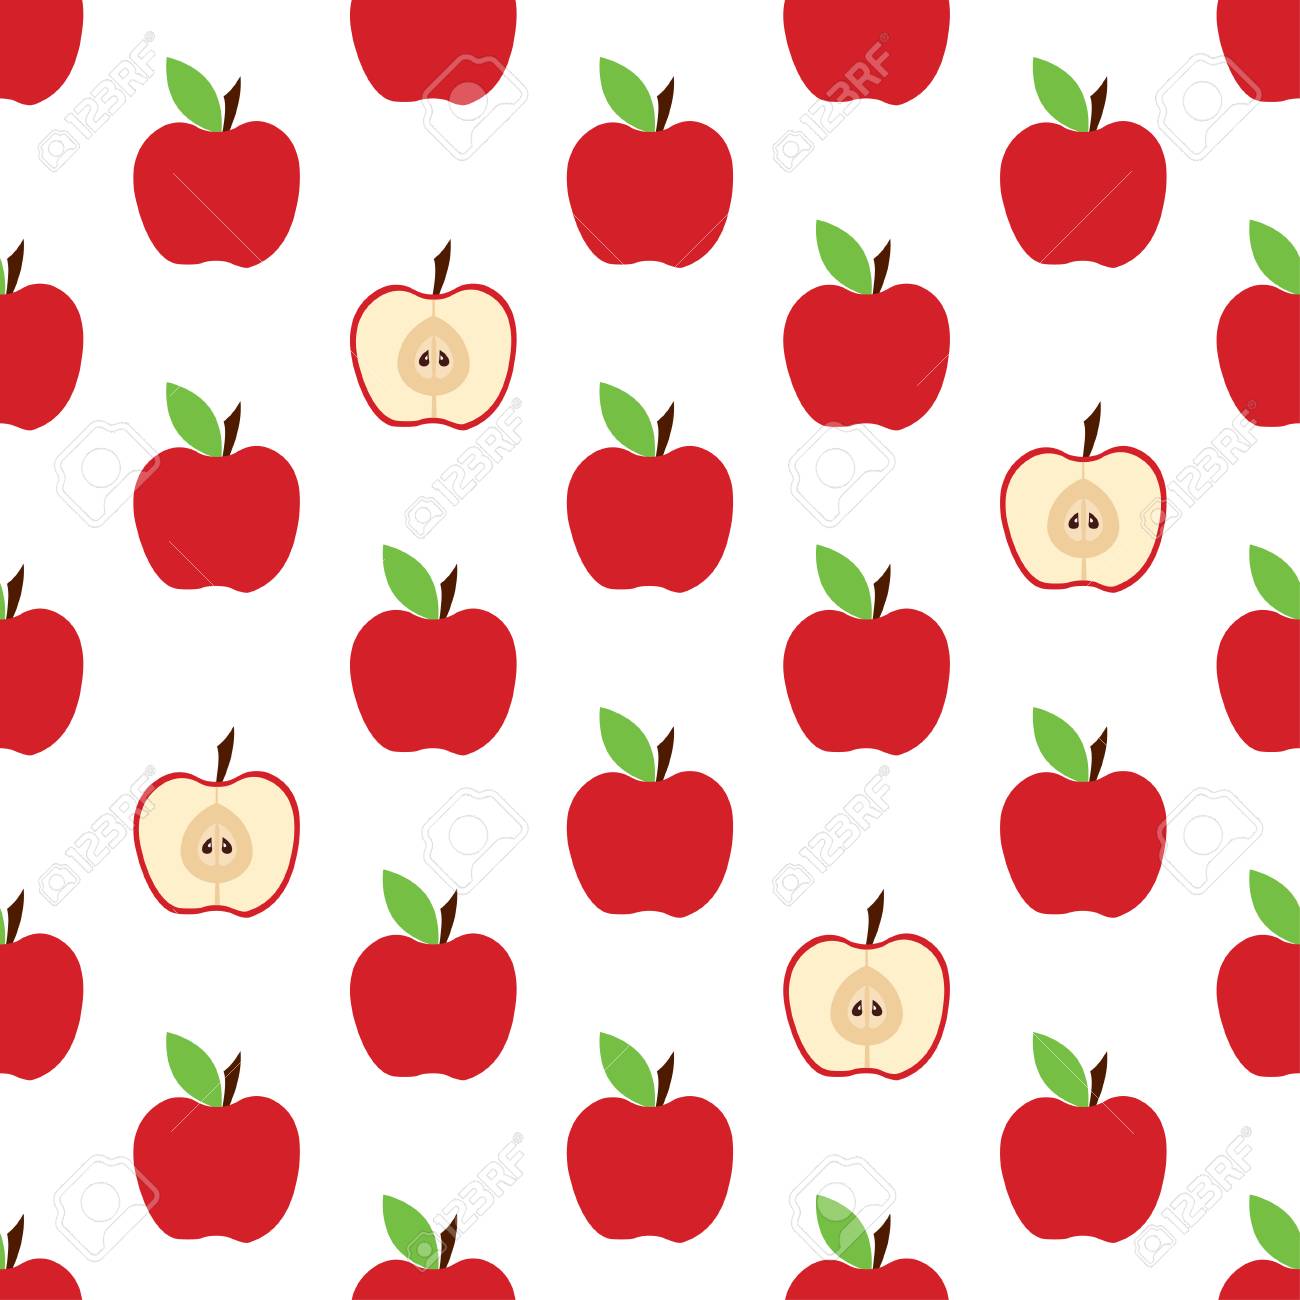 Red Apple Seamless Pattern Background With Cute Fruits Group Of